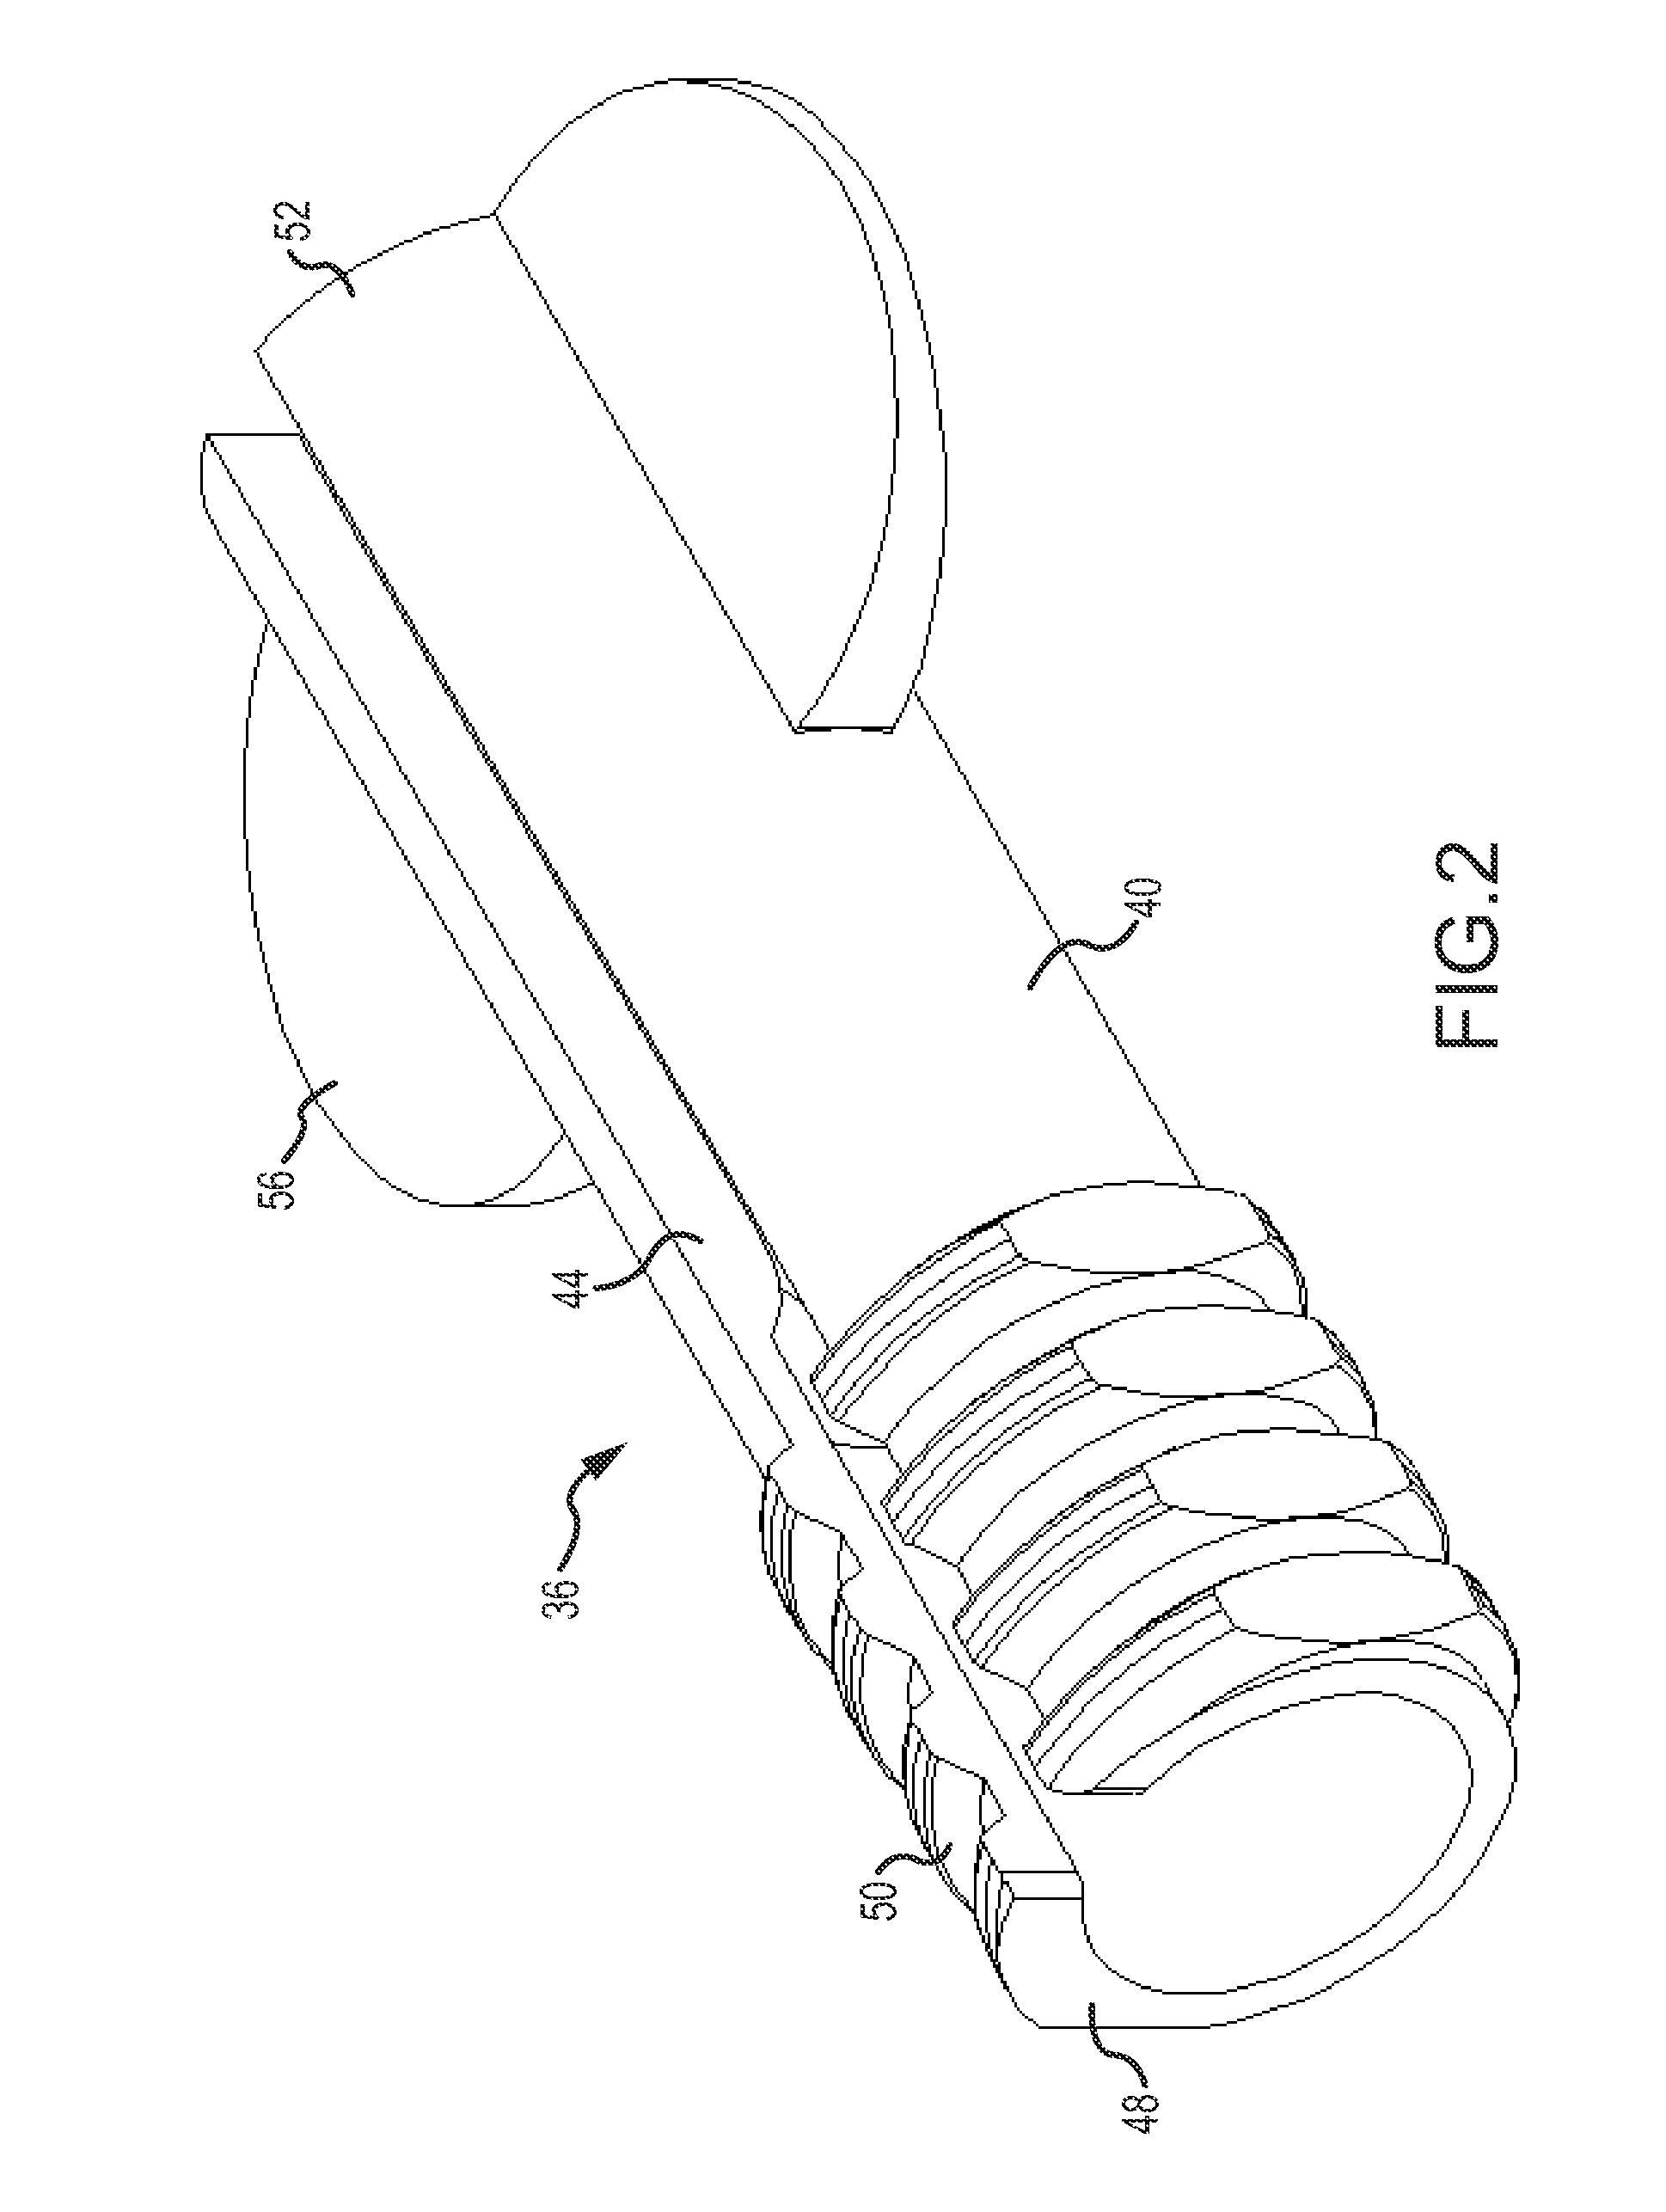 Luer connector